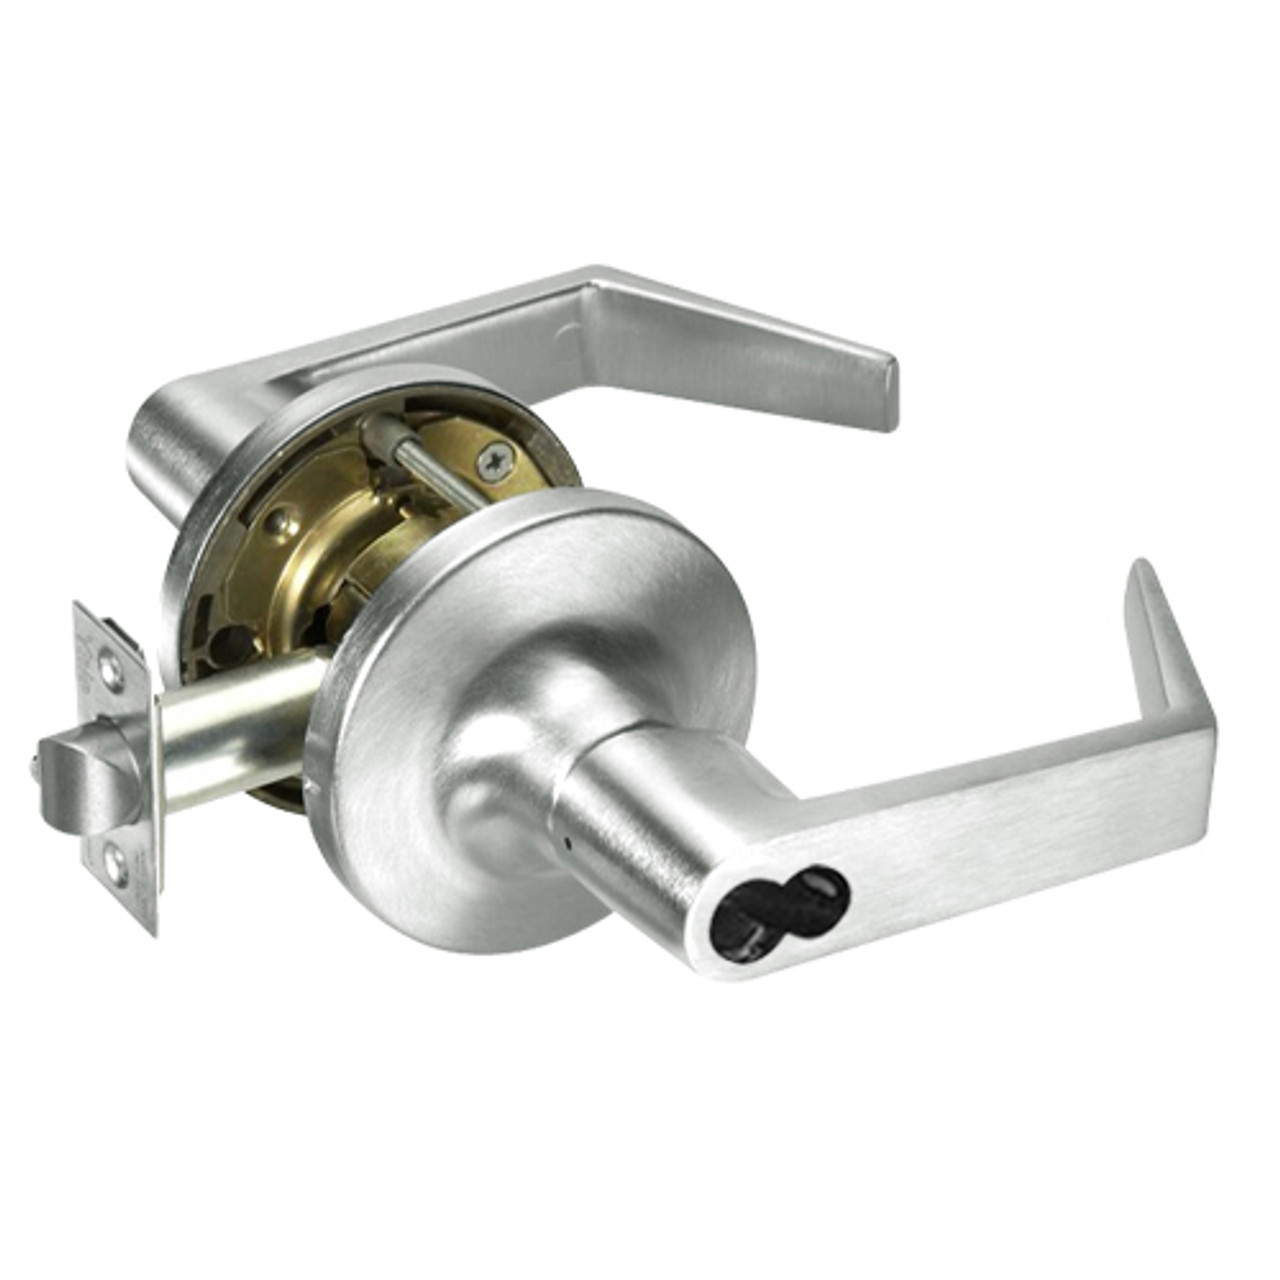 M-AU5404LN-619 Yale 5400LN Series Single Cylinder Entry Cylindrical Locks with Augusta Lever Prepped for Medeco-ASSA IC Core in Satin Nickel